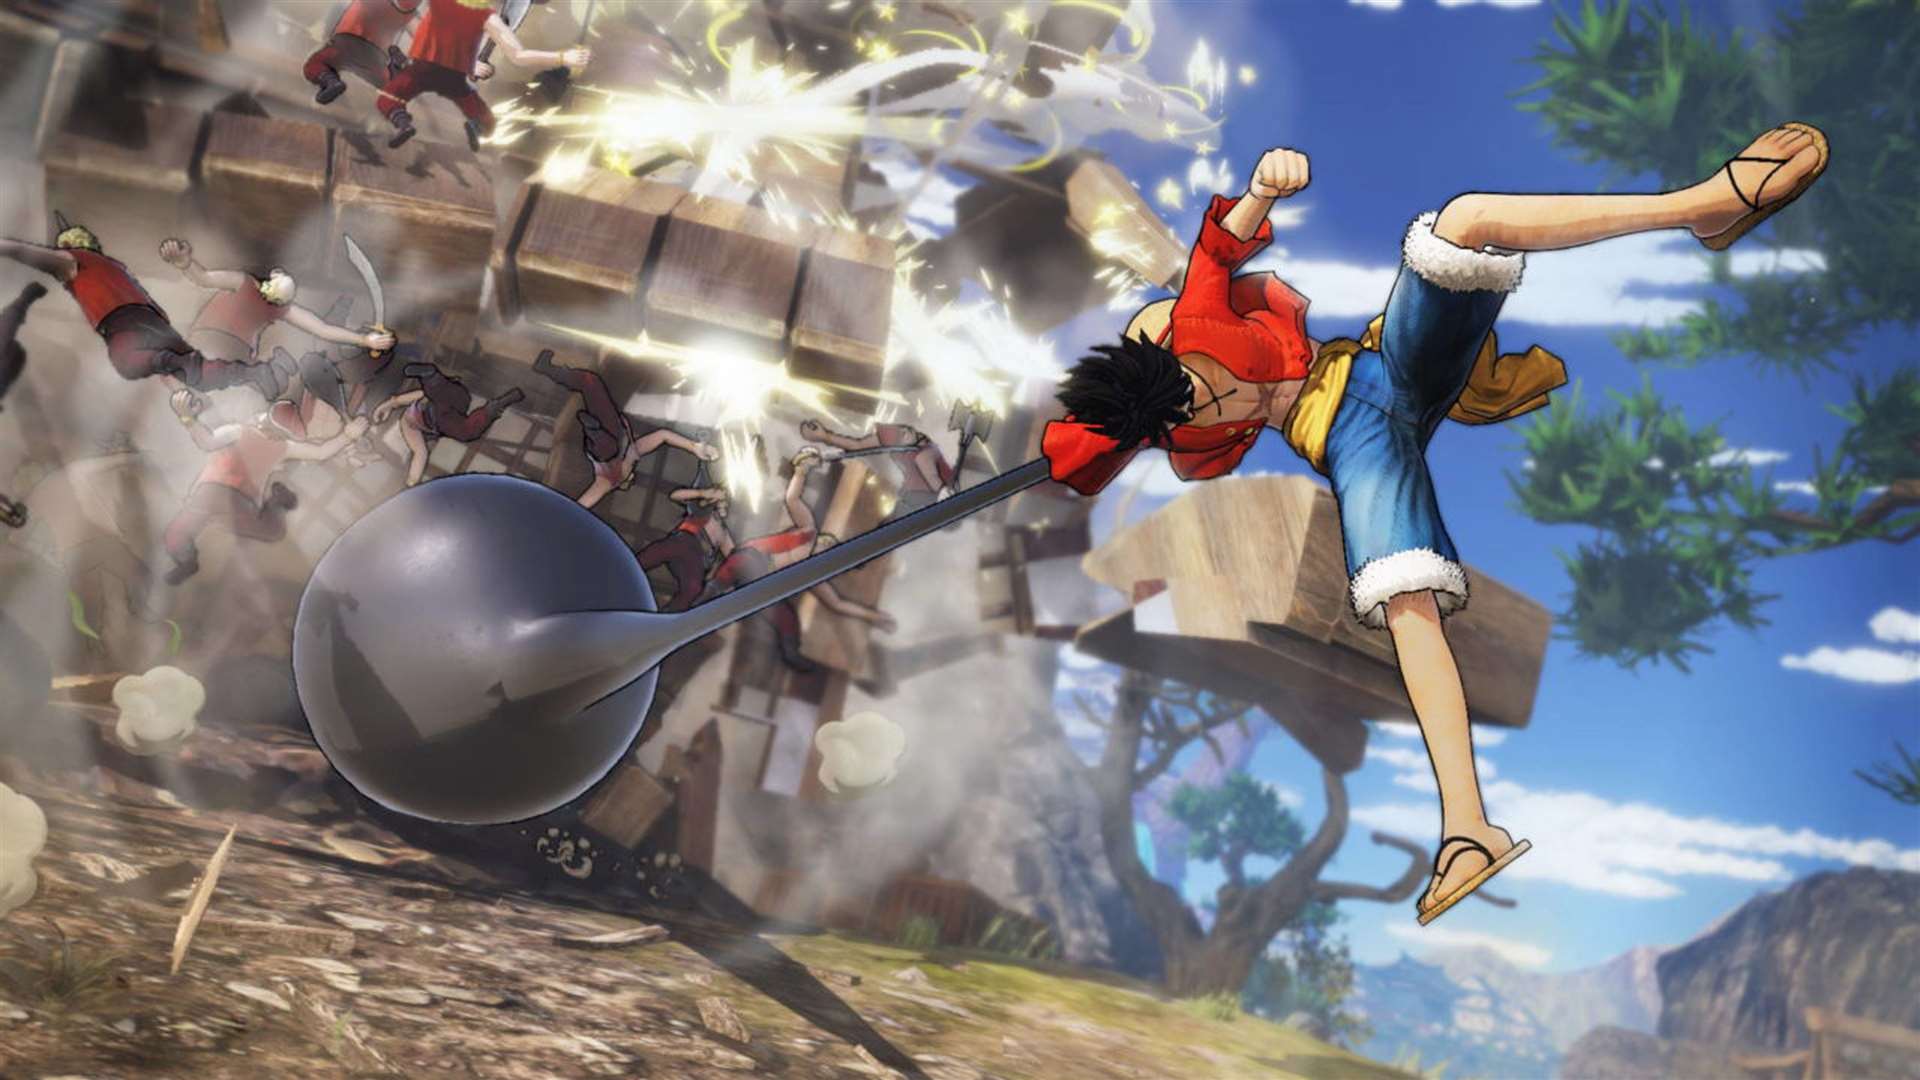 One Piece: Pirate Warriors 4. Picture: PA Photo/Handout